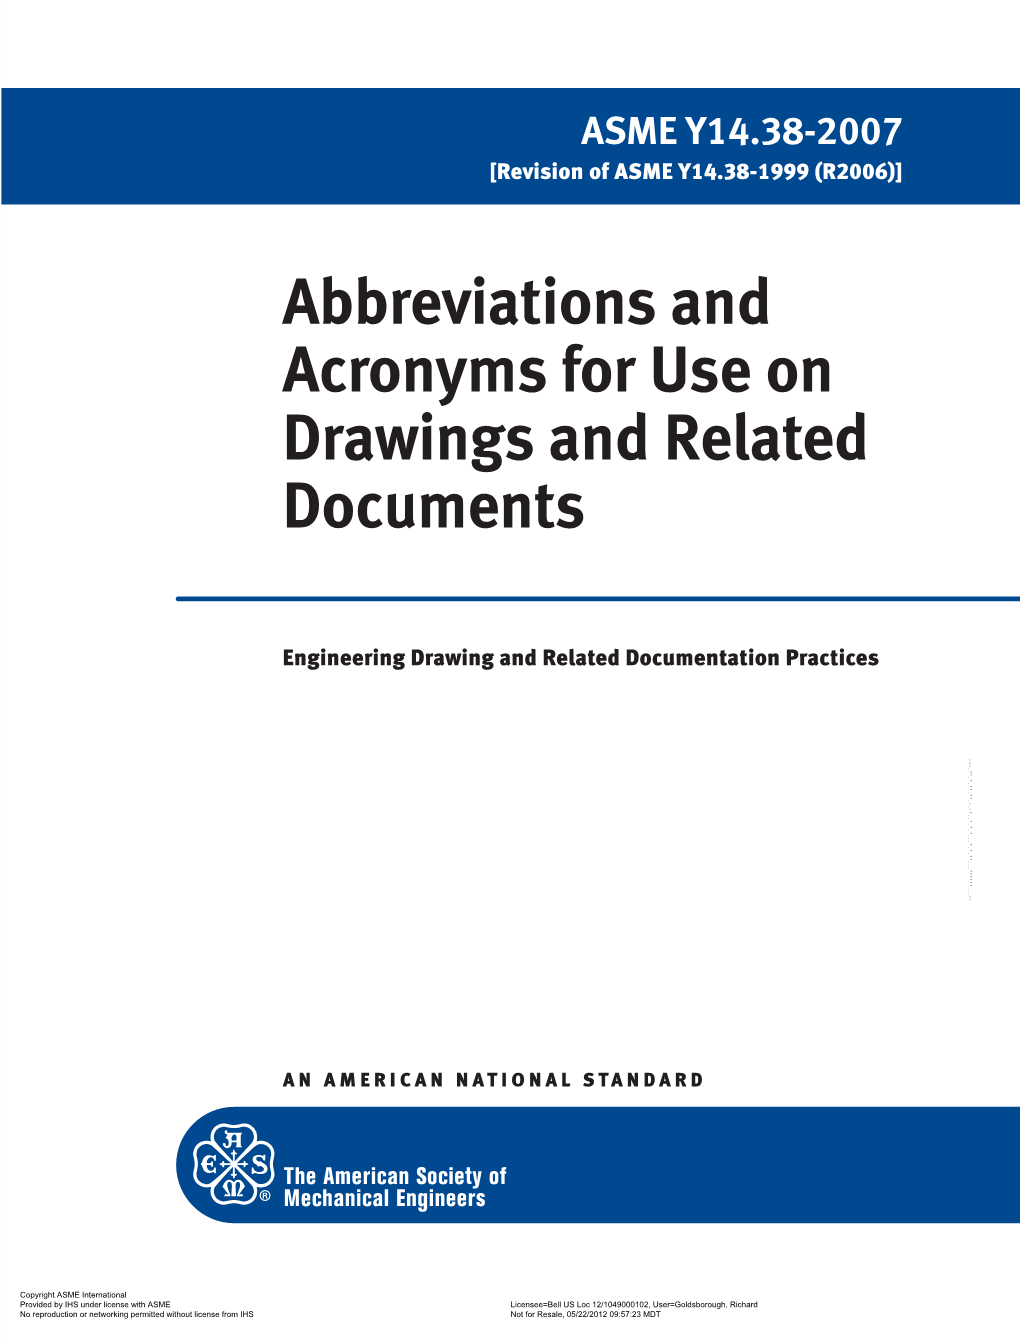 Abbreviations and Acronyms for Use on Drawings and Related Documents